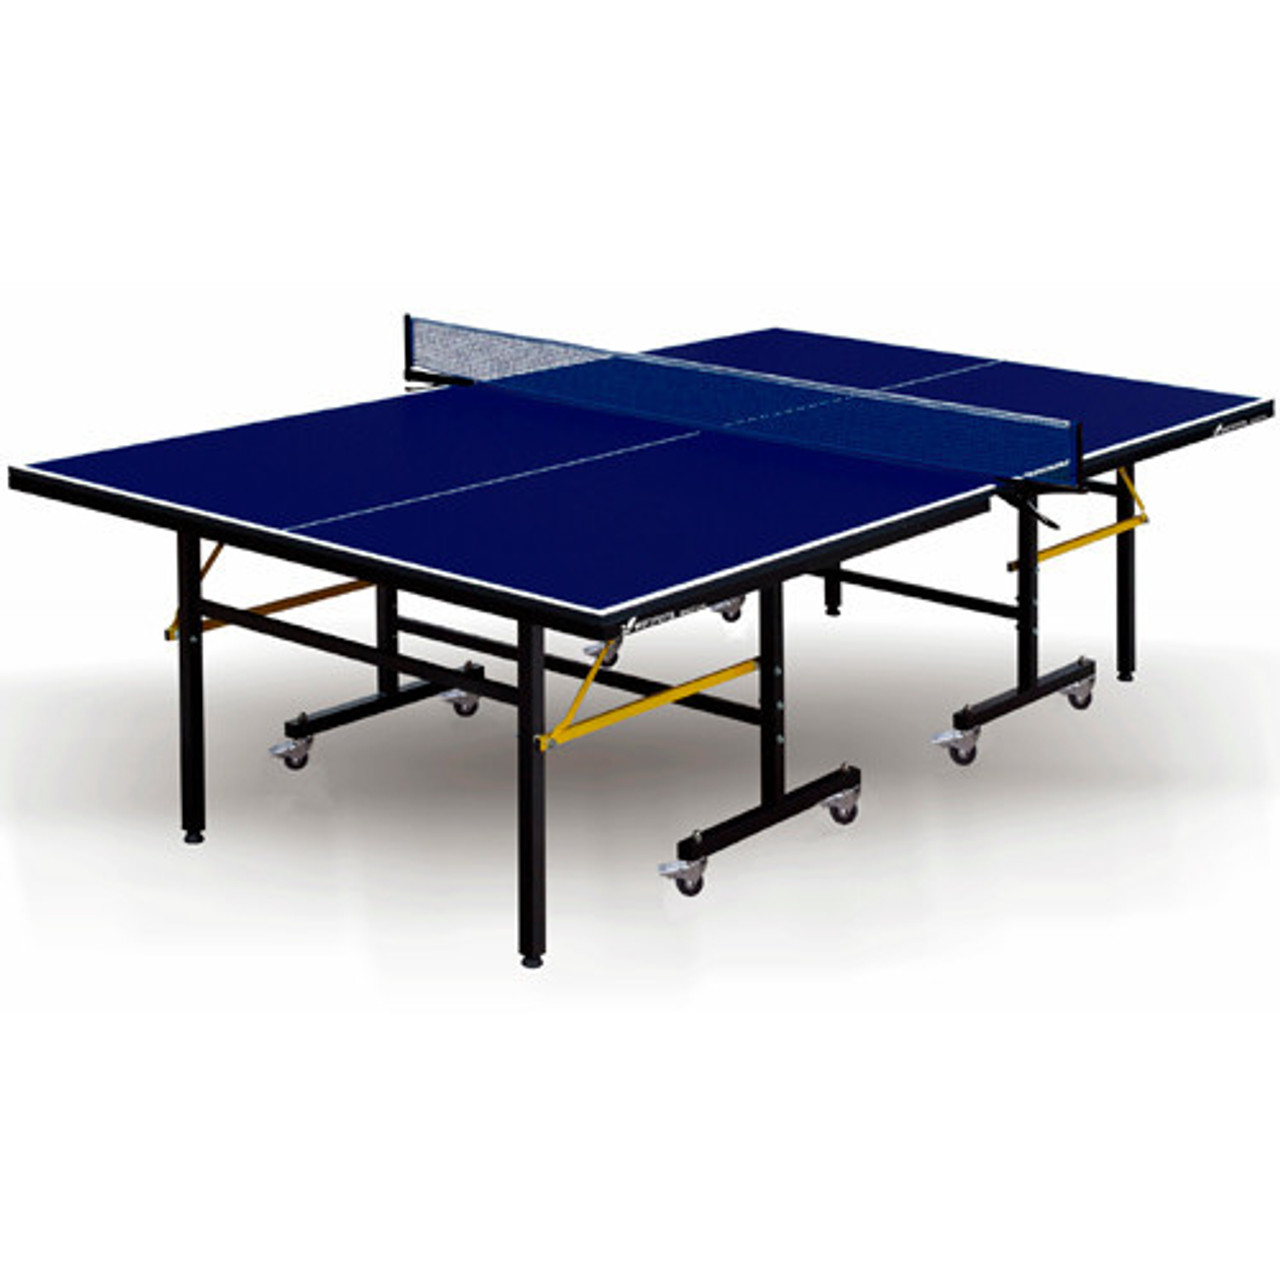 Match Table Tennis Table Shop by Sport